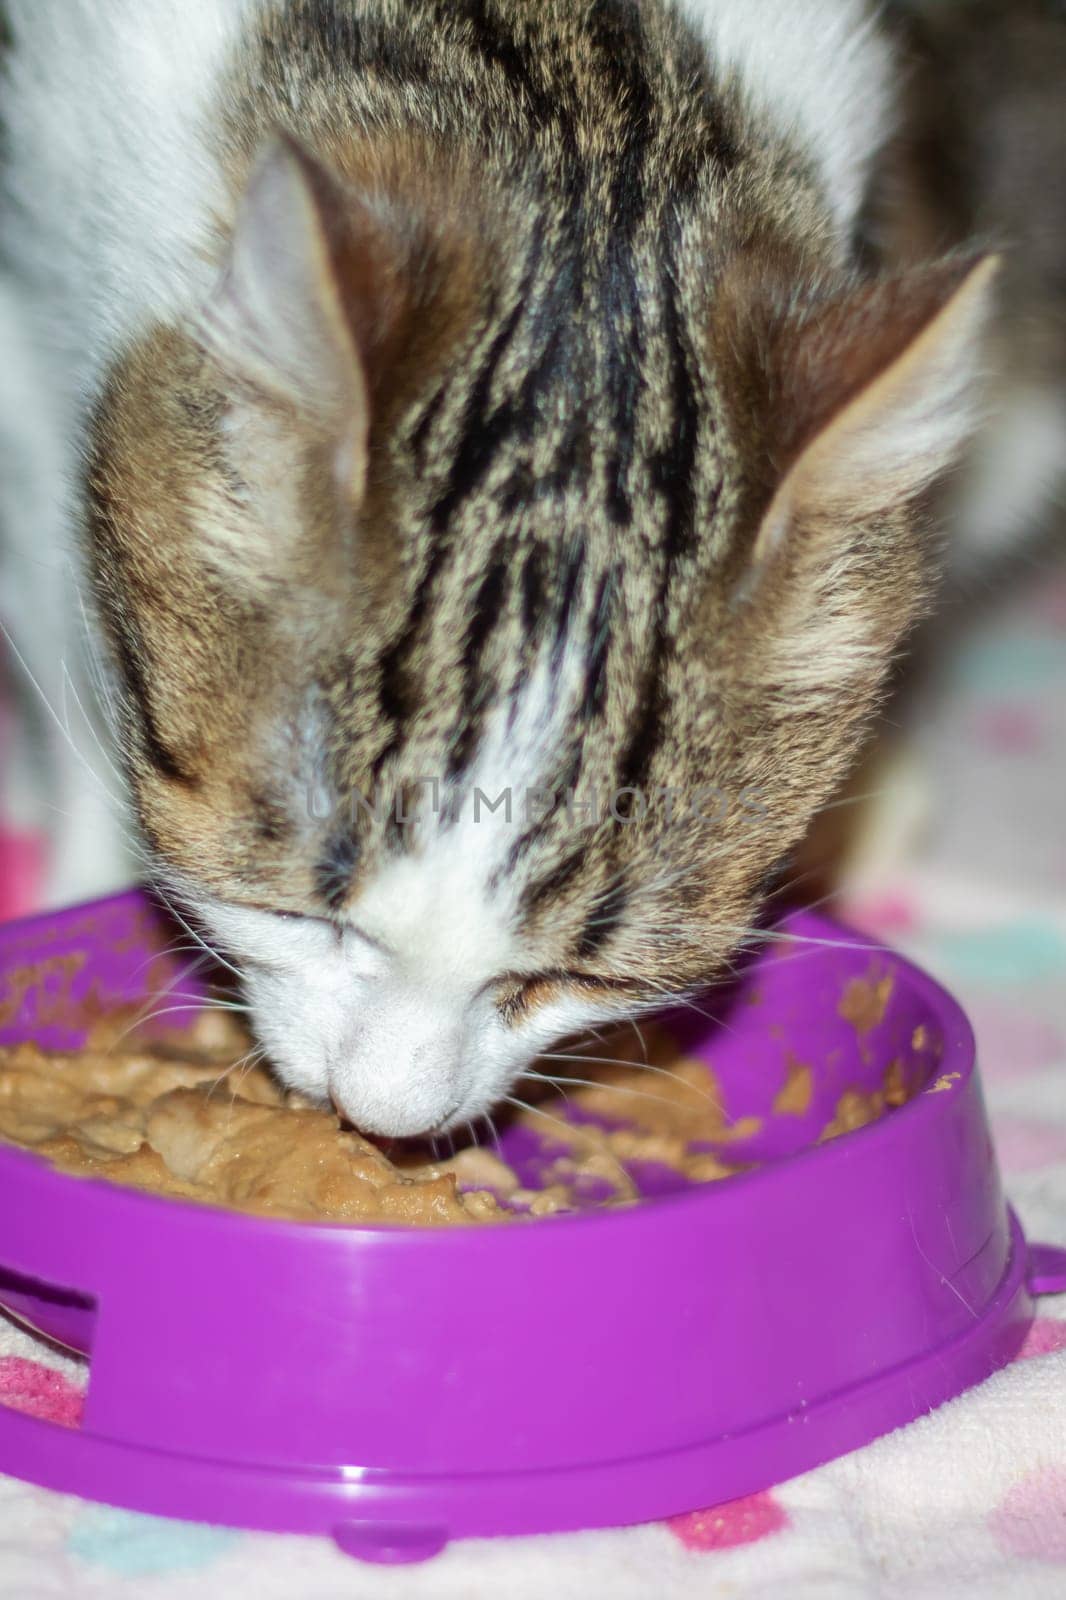 A domestic shorthaired Felidae, a small to mediumsized carnivorous cat, is eating from a pink bowl with whiskers and a snout from a pet supply store